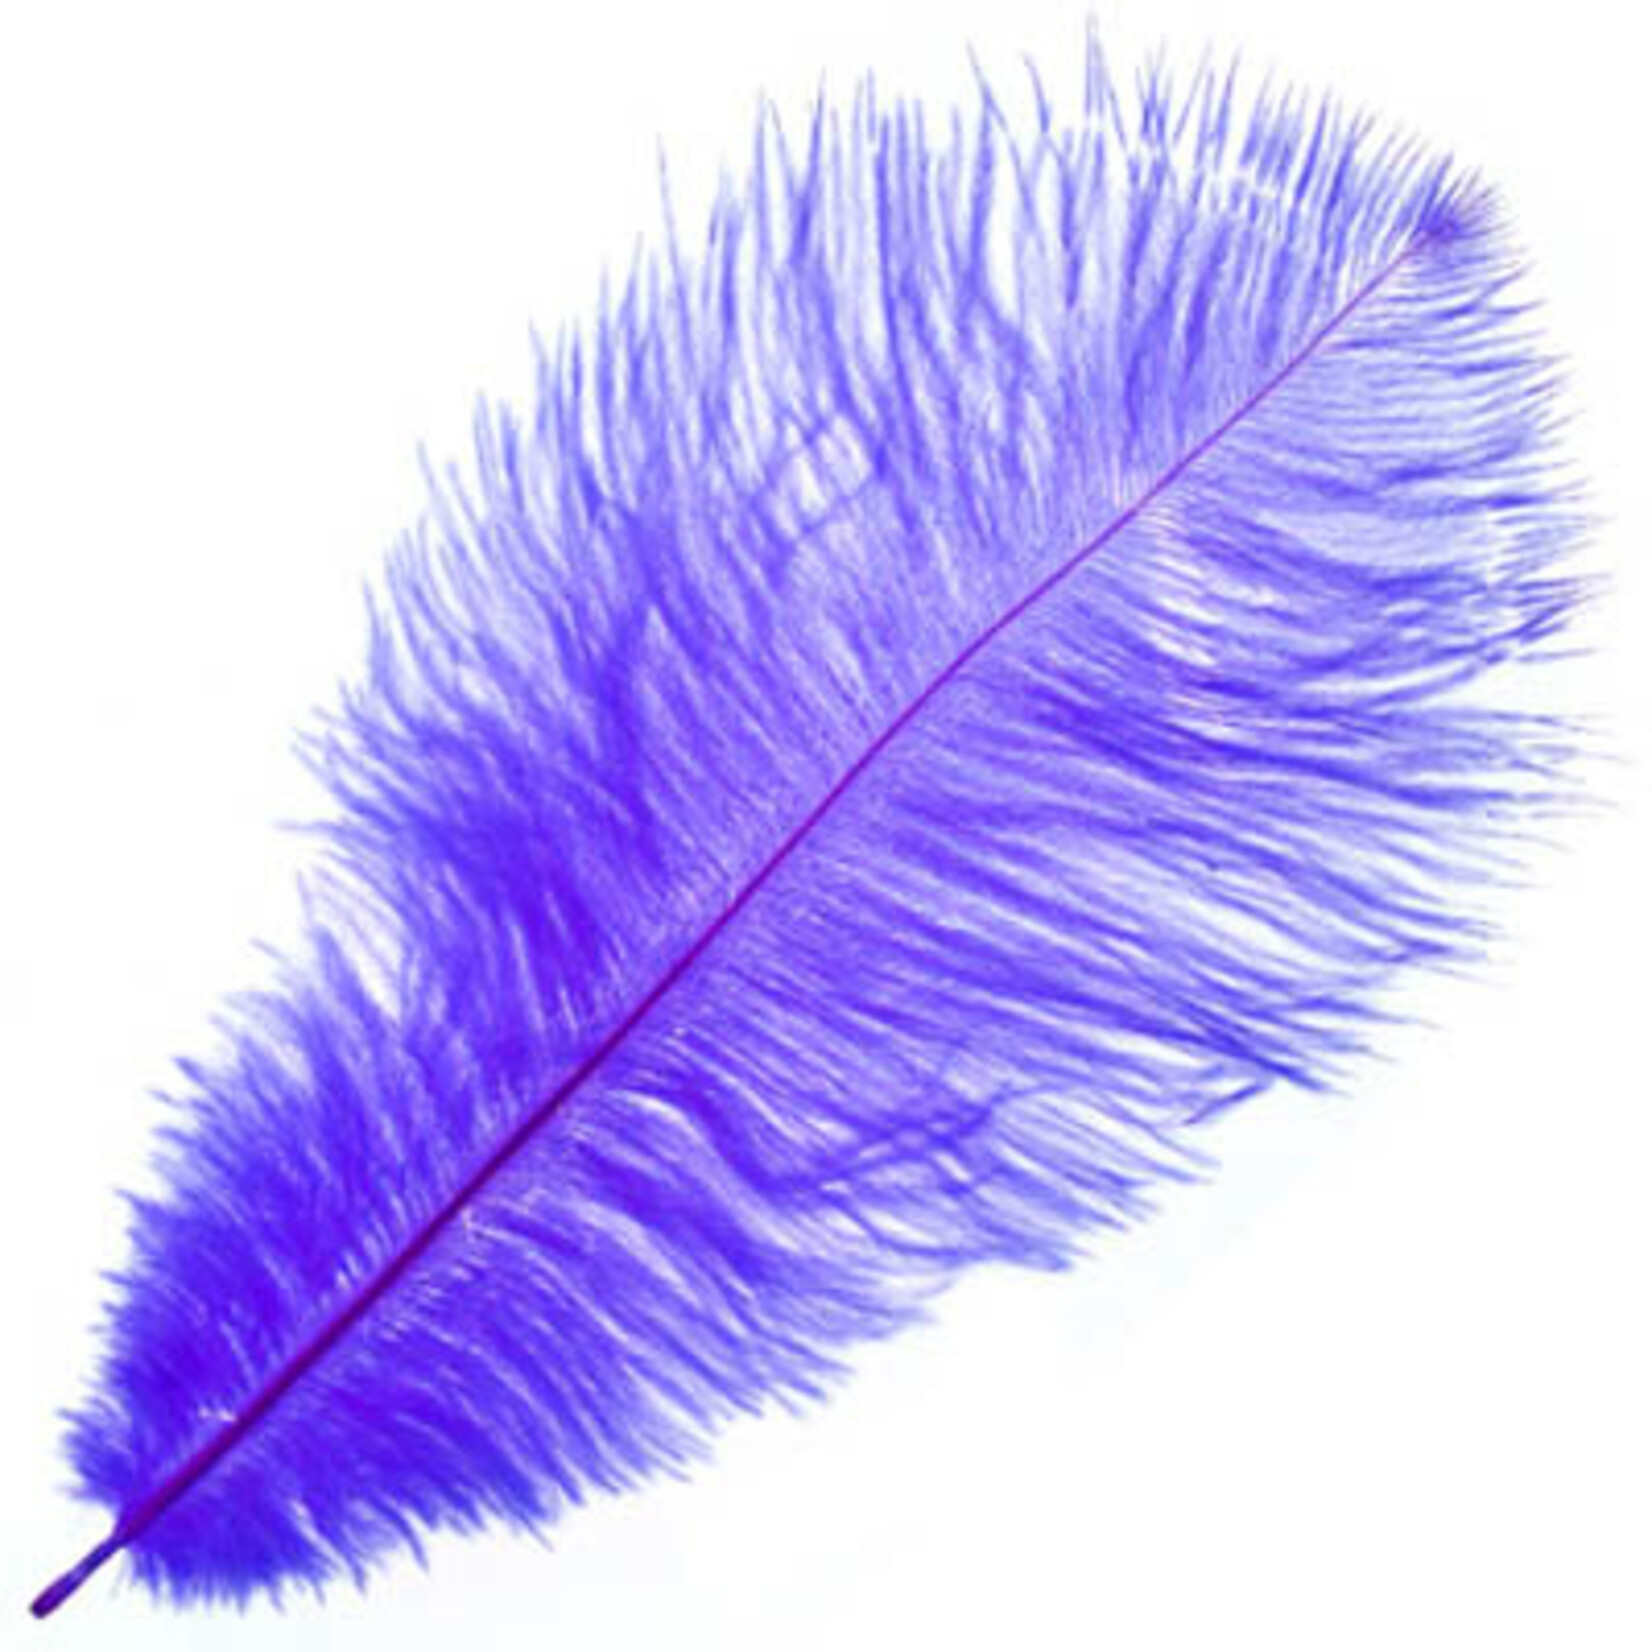 Ostrich Drab Plumes 6-8 Inch (12 pieces) Purple